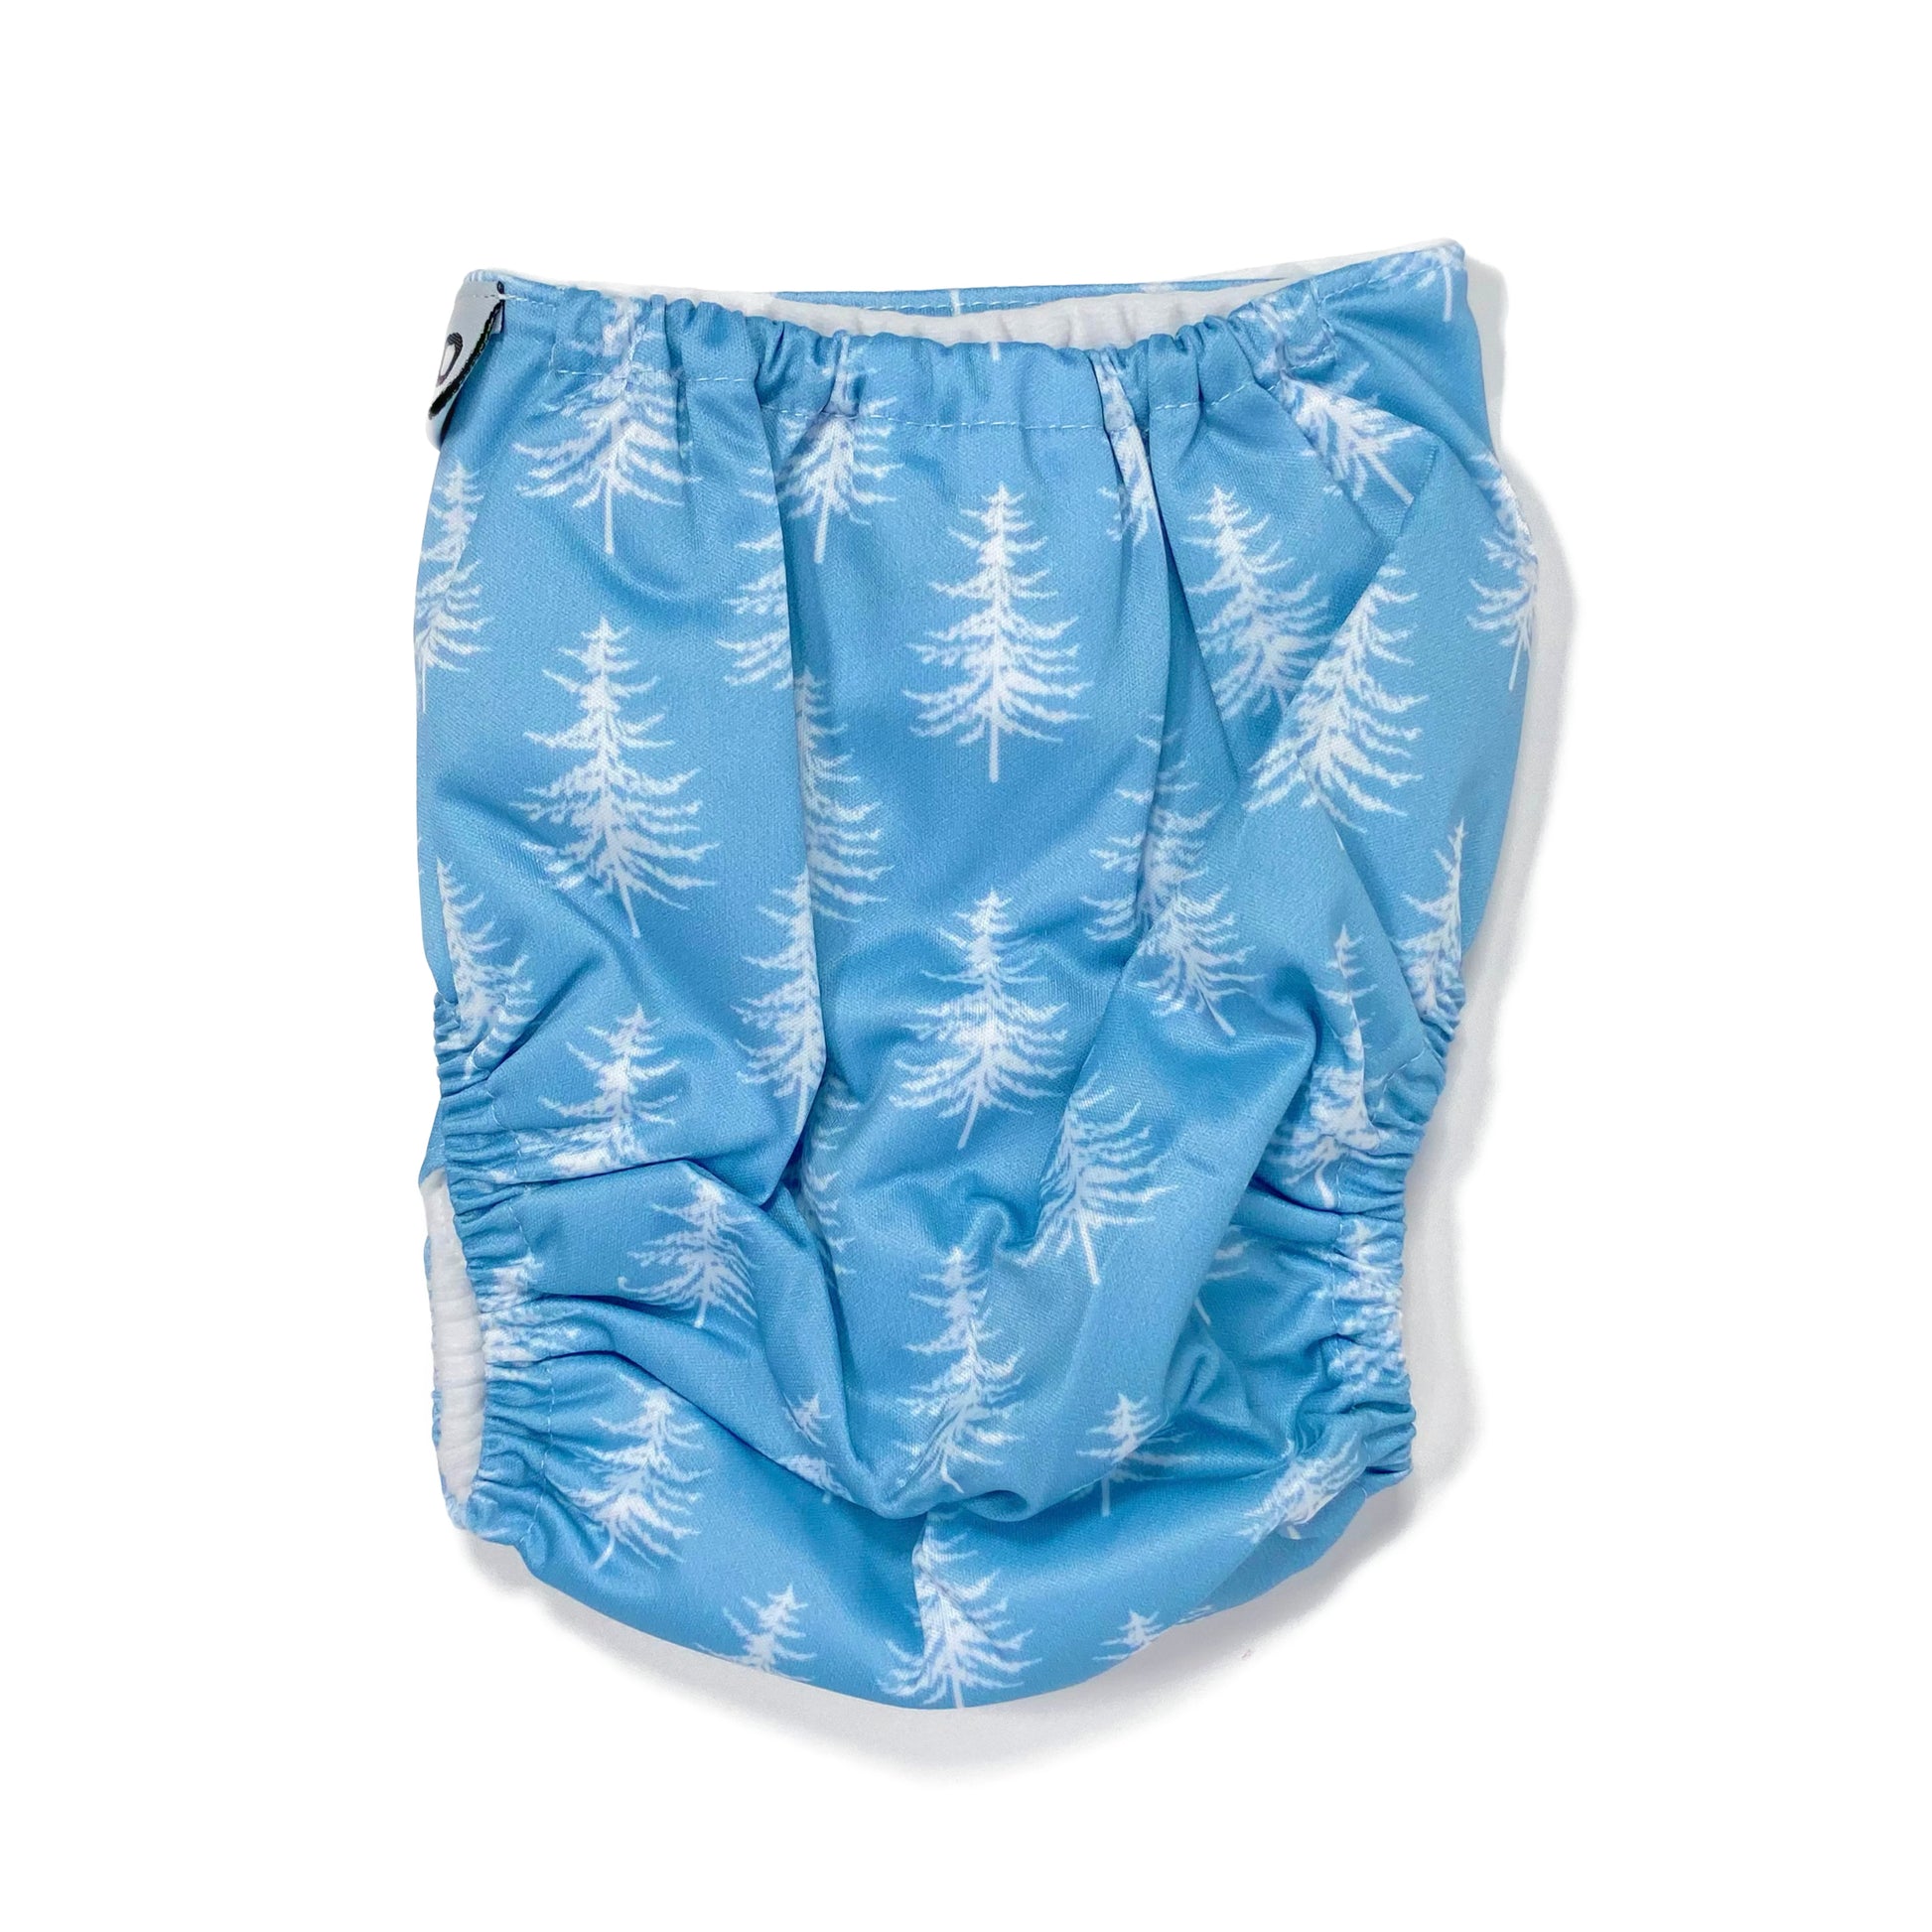 An adjustable reusable nappy for babies and toddlers, featuring a cool blue pine design design, with images of white pine trees on a blue background. View shows the back of the nappy.